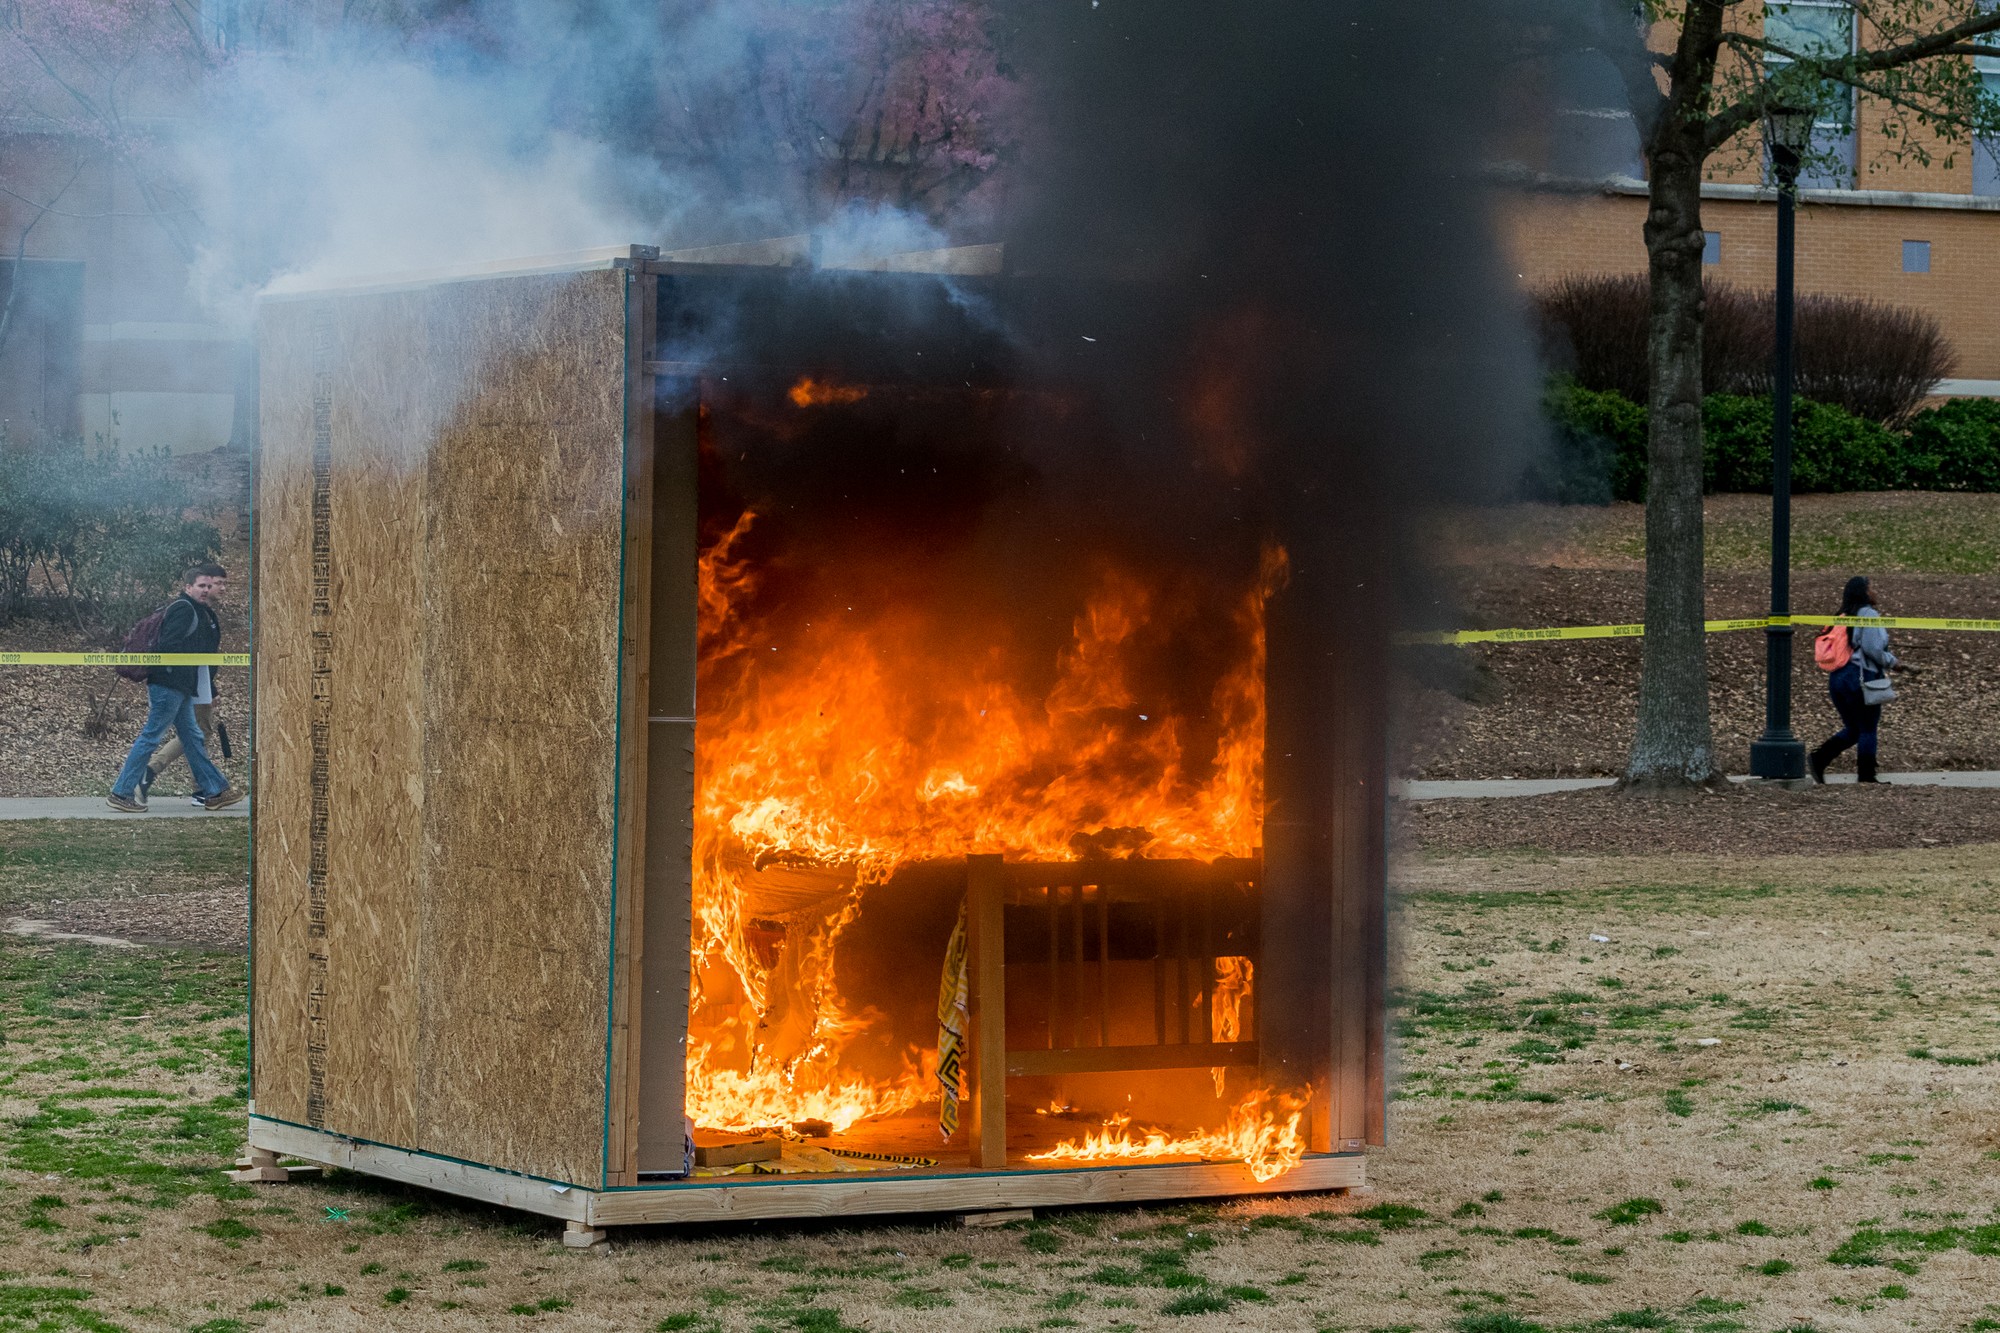 Campus officials burn mock dorm to promote fire safety